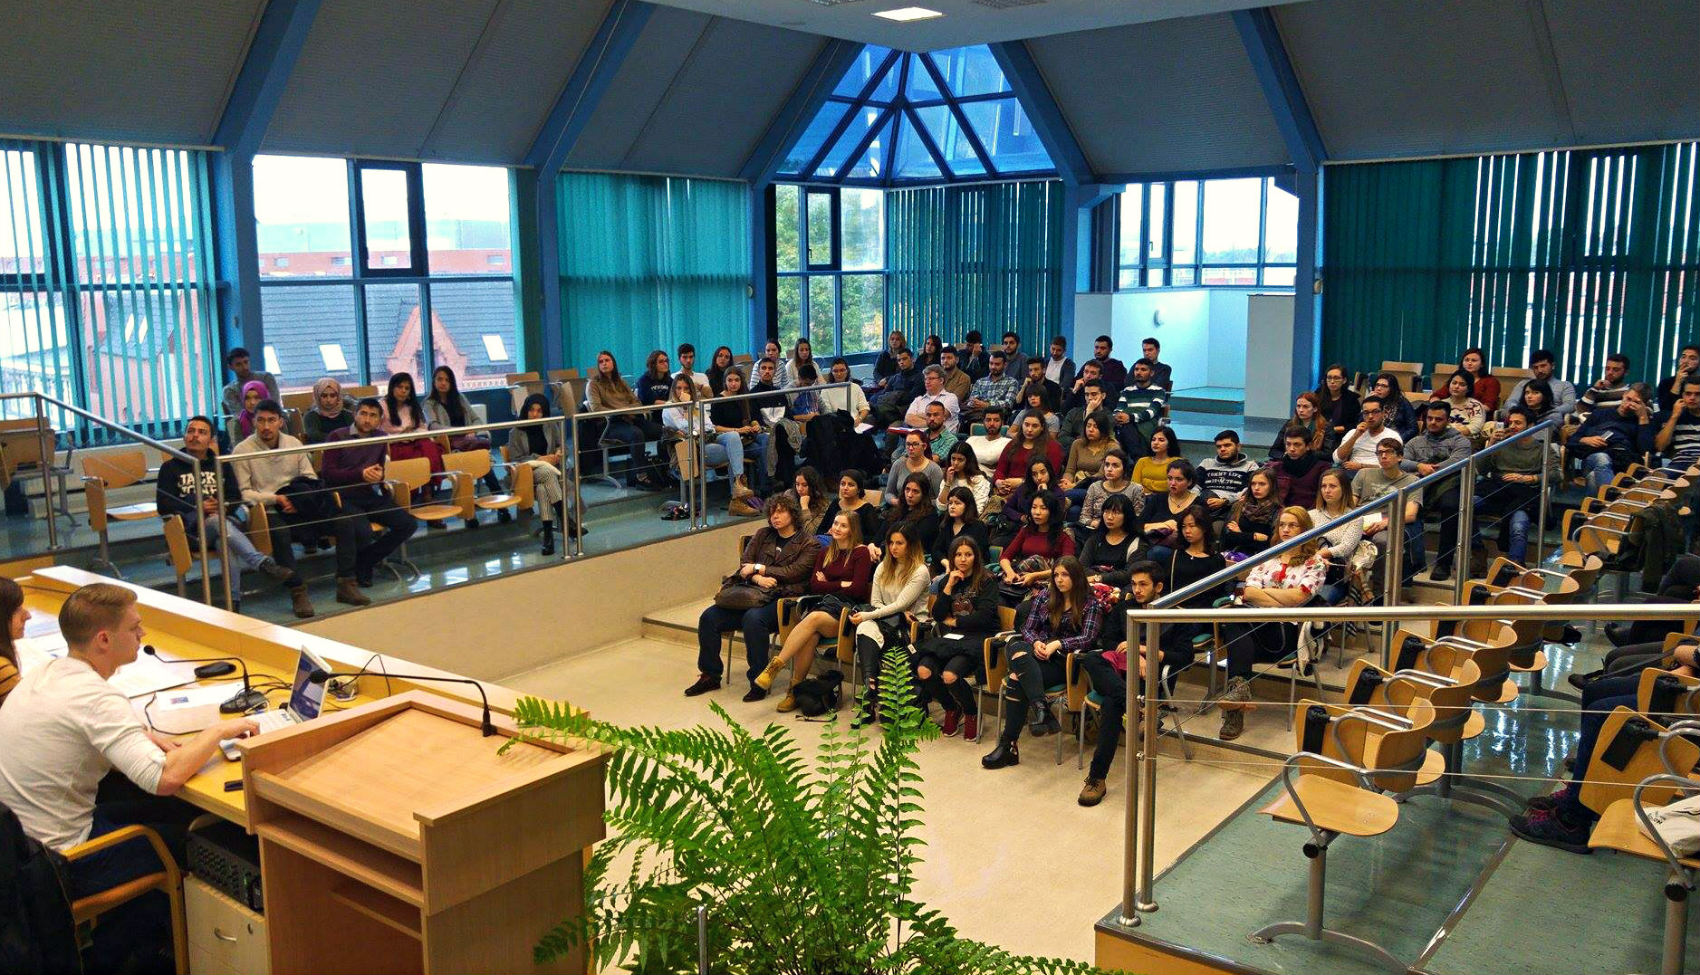 120 students (from, among others, Spain, Italy, Greece, Taiwan, Georgia, Turkey,  Montenegro) arrived at the University of Opole to study in the new academic year under the EU Erasmus Plus Programme. We bid you all a warm welcome!